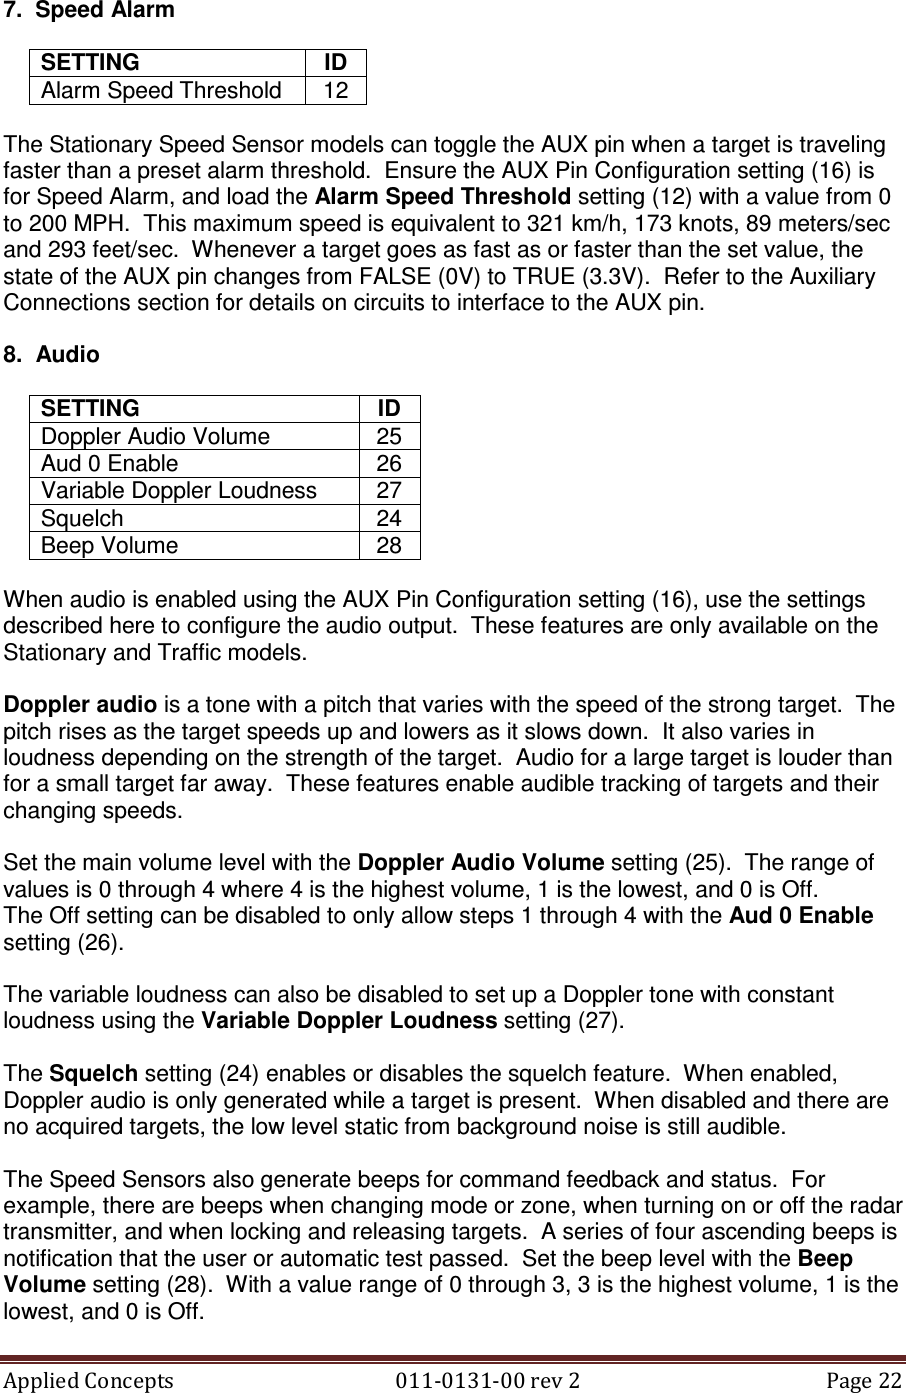 Applied Concepts                                            011-0131-00 rev 2  Page 22  7.  Speed Alarm  SETTING  ID Alarm Speed Threshold  12  The Stationary Speed Sensor models can toggle the AUX pin when a target is traveling faster than a preset alarm threshold.  Ensure the AUX Pin Configuration setting (16) is for Speed Alarm, and load the Alarm Speed Threshold setting (12) with a value from 0 to 200 MPH.  This maximum speed is equivalent to 321 km/h, 173 knots, 89 meters/sec and 293 feet/sec.  Whenever a target goes as fast as or faster than the set value, the state of the AUX pin changes from FALSE (0V) to TRUE (3.3V).  Refer to the Auxiliary Connections section for details on circuits to interface to the AUX pin.  8.  Audio  SETTING  ID Doppler Audio Volume  25 Aud 0 Enable  26 Variable Doppler Loudness  27 Squelch  24 Beep Volume  28  When audio is enabled using the AUX Pin Configuration setting (16), use the settings described here to configure the audio output.  These features are only available on the Stationary and Traffic models.  Doppler audio is a tone with a pitch that varies with the speed of the strong target.  The pitch rises as the target speeds up and lowers as it slows down.  It also varies in loudness depending on the strength of the target.  Audio for a large target is louder than for a small target far away.  These features enable audible tracking of targets and their changing speeds.  Set the main volume level with the Doppler Audio Volume setting (25).  The range of values is 0 through 4 where 4 is the highest volume, 1 is the lowest, and 0 is Off. The Off setting can be disabled to only allow steps 1 through 4 with the Aud 0 Enable setting (26).  The variable loudness can also be disabled to set up a Doppler tone with constant loudness using the Variable Doppler Loudness setting (27).  The Squelch setting (24) enables or disables the squelch feature.  When enabled, Doppler audio is only generated while a target is present.  When disabled and there are no acquired targets, the low level static from background noise is still audible.  The Speed Sensors also generate beeps for command feedback and status.  For example, there are beeps when changing mode or zone, when turning on or off the radar transmitter, and when locking and releasing targets.  A series of four ascending beeps is notification that the user or automatic test passed.  Set the beep level with the Beep Volume setting (28).  With a value range of 0 through 3, 3 is the highest volume, 1 is the lowest, and 0 is Off. 